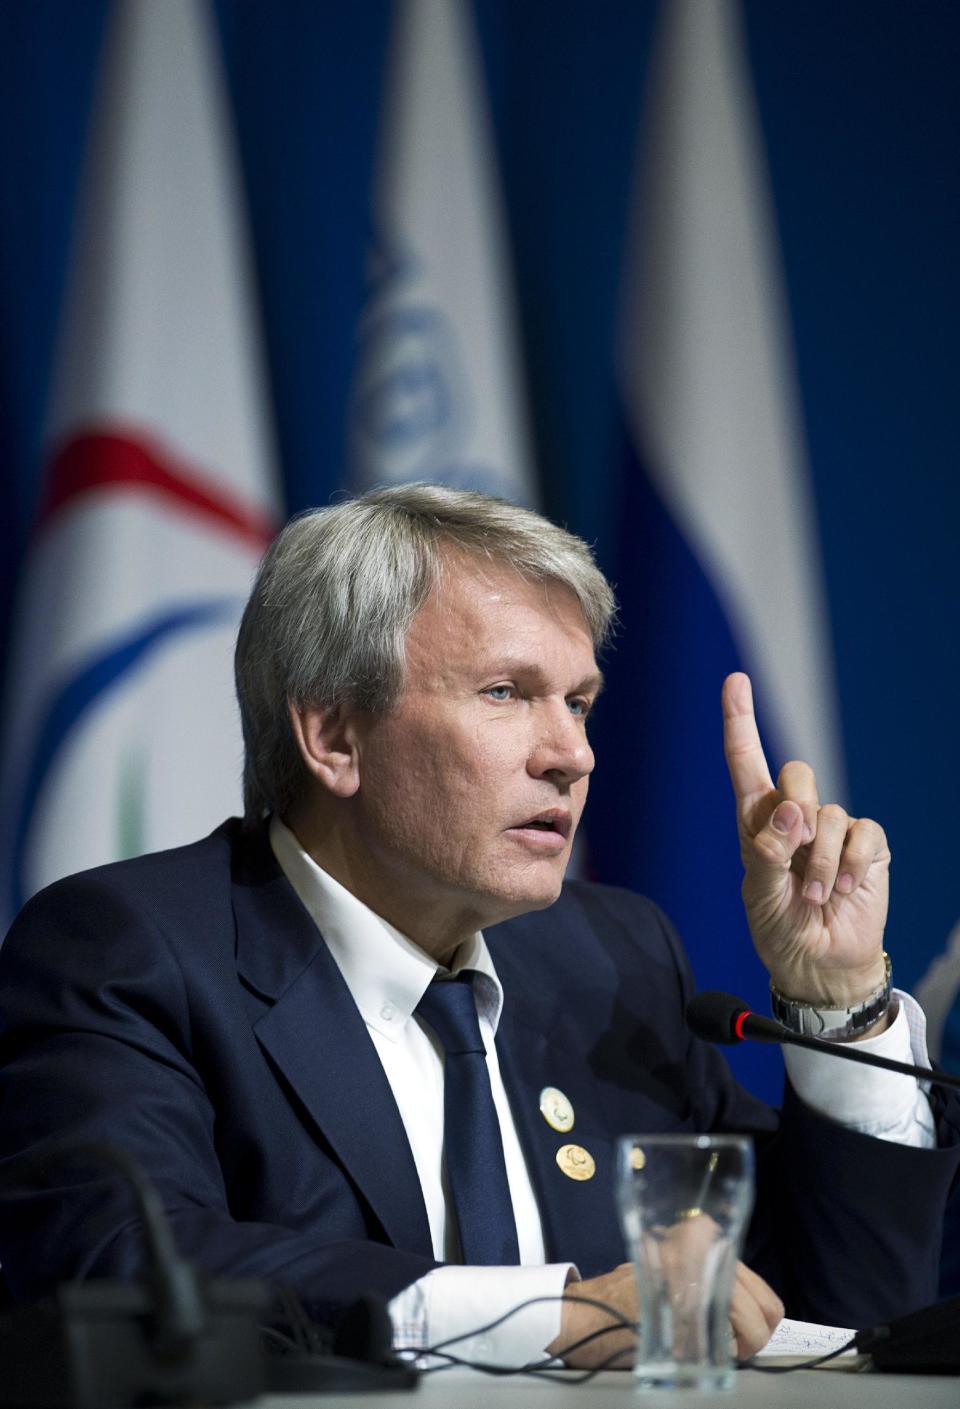 President of the the National Paralympic Committee of Ukraine Valeriy Suskevich holds up his finger during a press conference before the closing ceremony of the 2014 Winter Paralympics in Sochi, Russia, Sunday, March 16, 2014. (AP Photo/Pavel Golovkin)